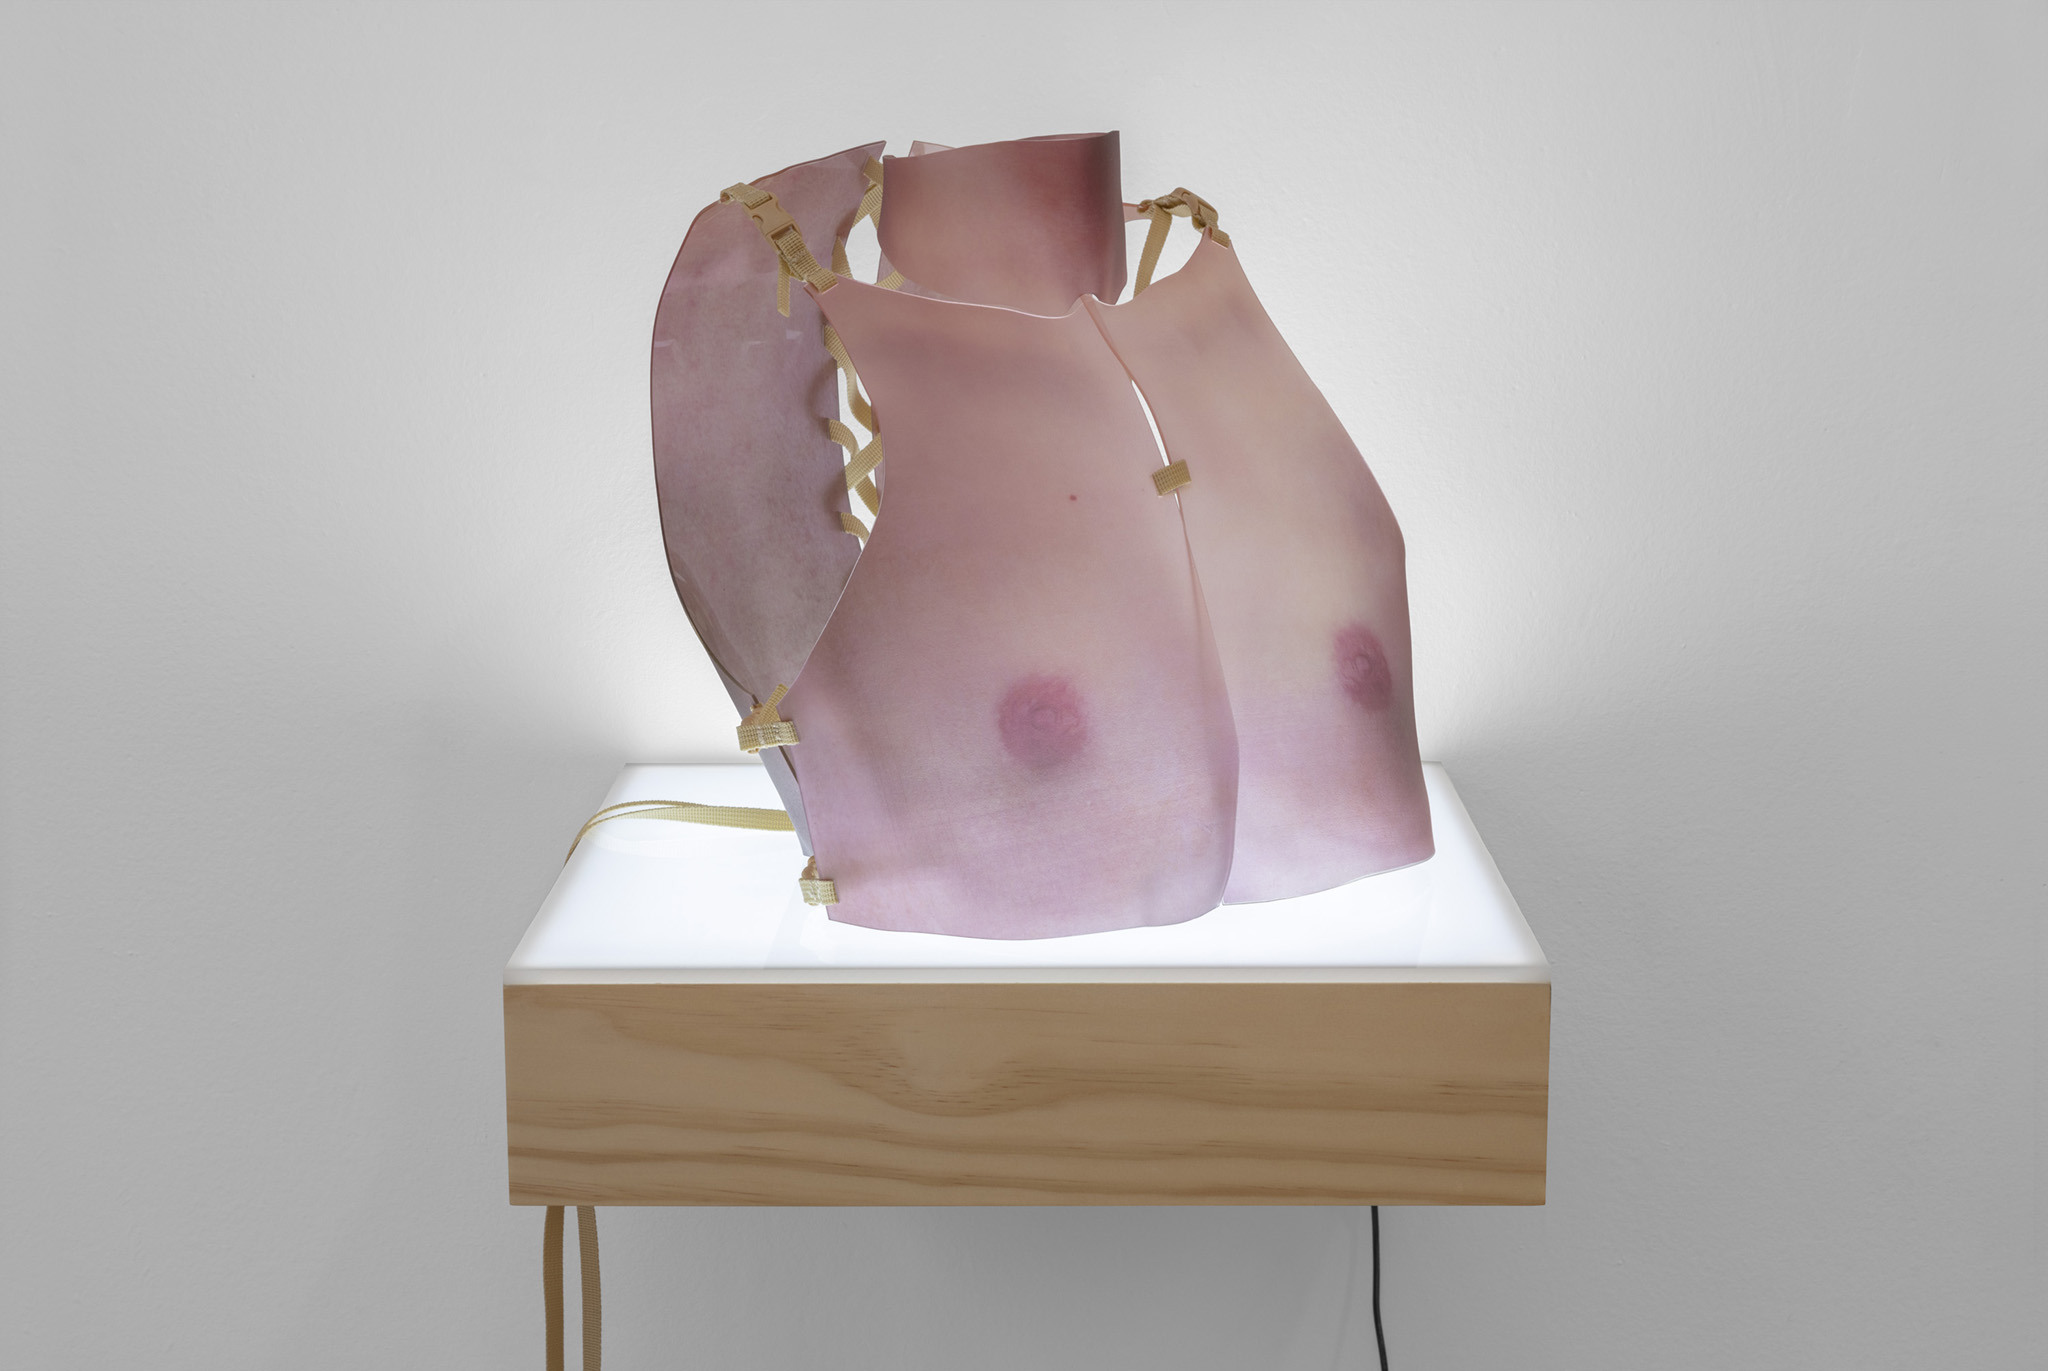 Claire Lachow, Survival Mode 4: Tegumentum I (Cuirass & Gorget), Acrylic transfer on clear acrylic sheet, polypropylene webbing, side-release buckles, light box, 2022